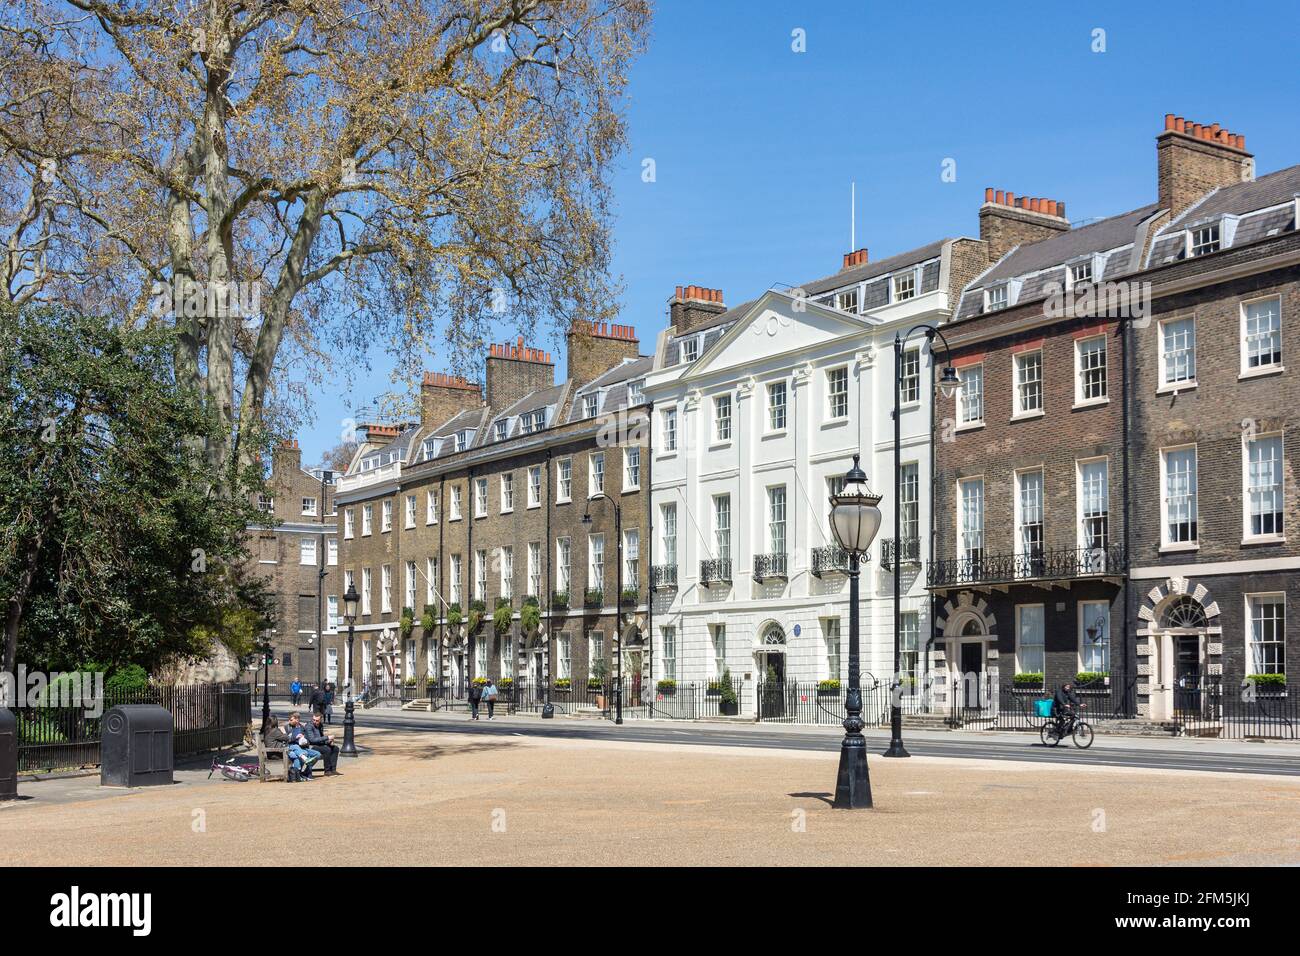 Georgian townhouses and garden, Bedford Square, Bloomsbury, London Borough of Camden, Greater London, England, United Kingdom Stock Photo